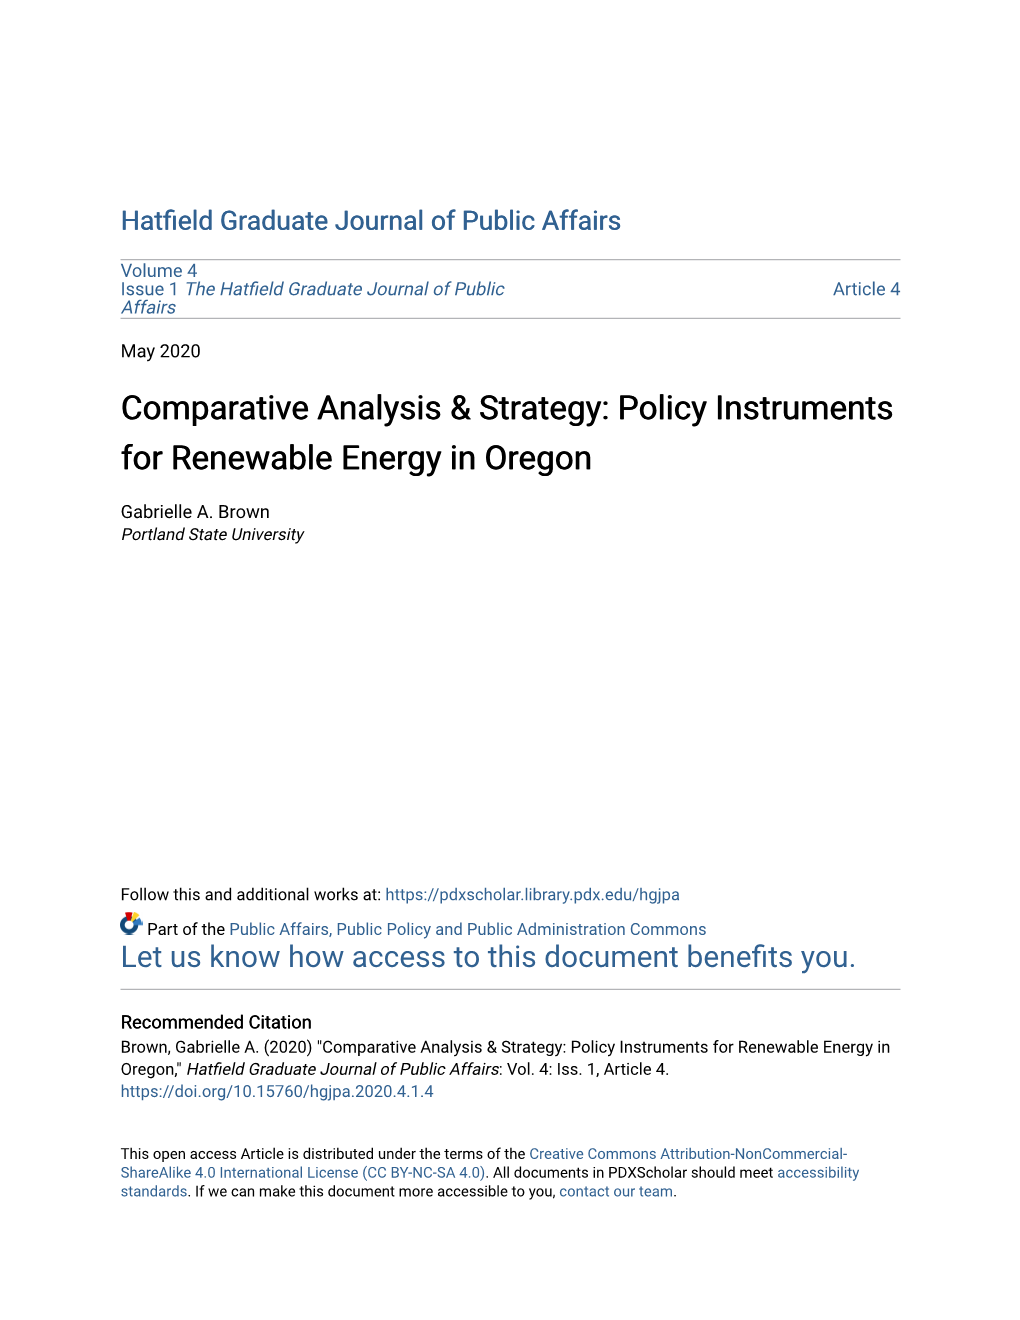 Policy Instruments for Renewable Energy in Oregon